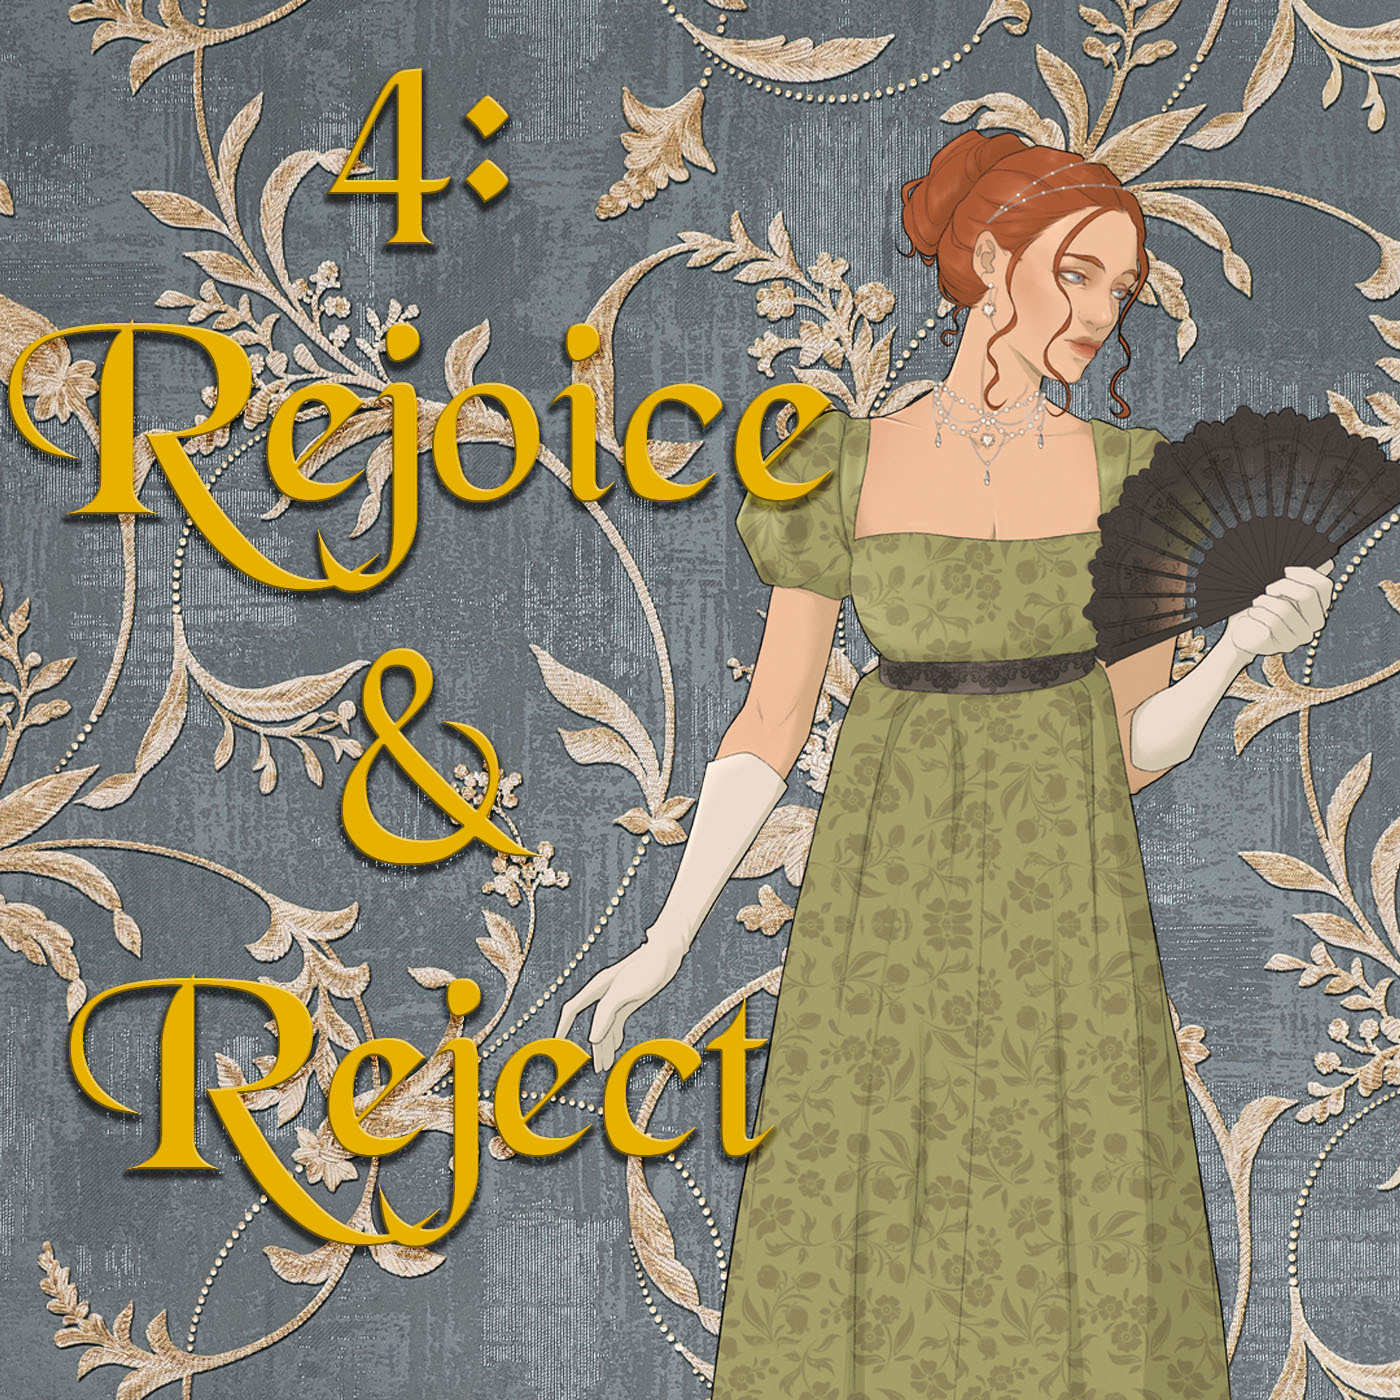 Ep 4: To Rejoice & Reject